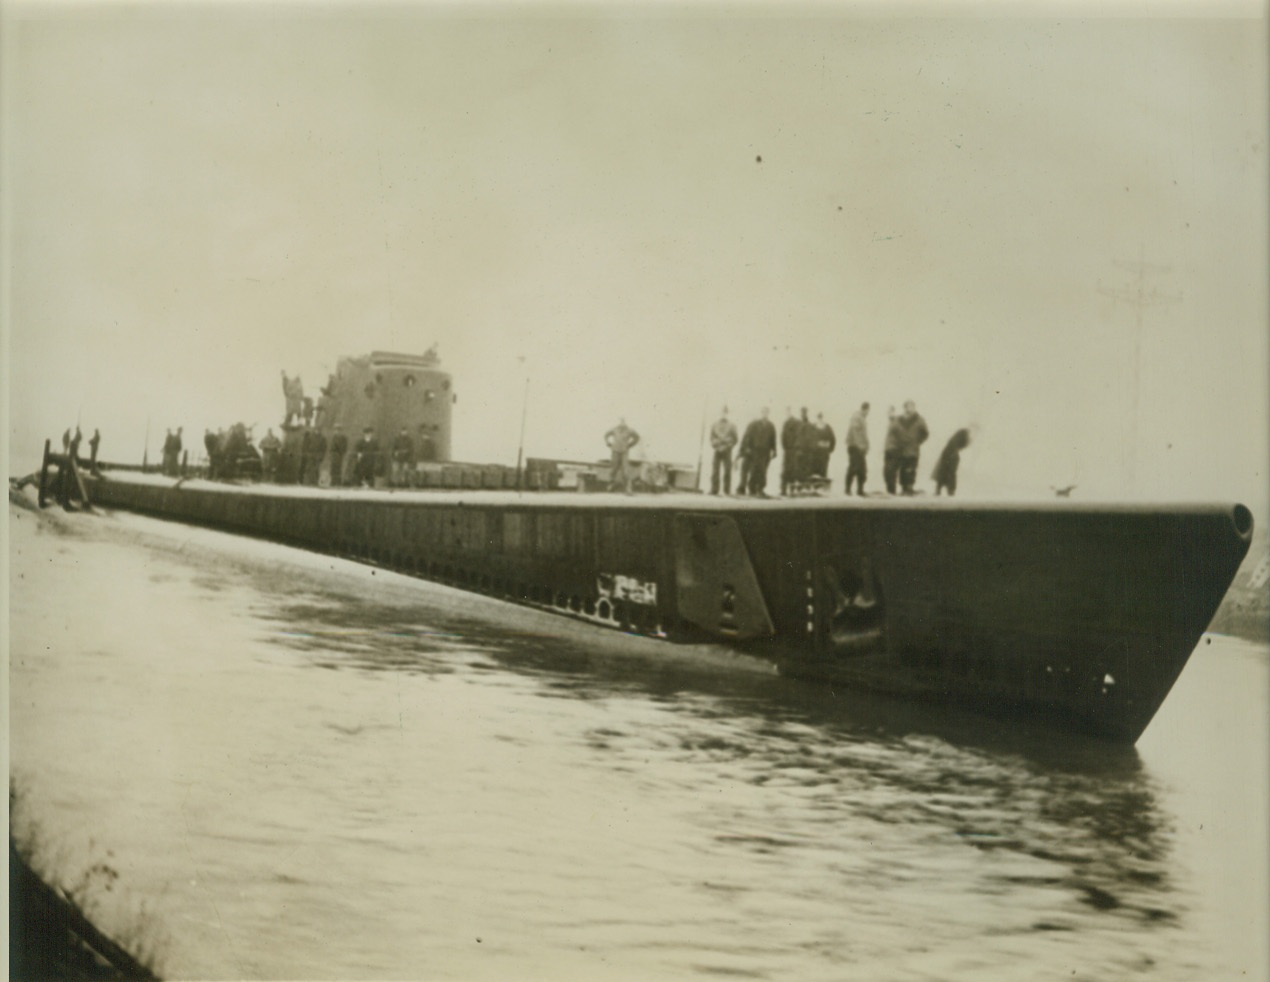 MID-WEST BUILT SUBMARINE ON WAY TO THE SEA, 12/26/1942. CHICAGO; The U.S.S. Peto, first U.S. Navy submarine built on the Great Lakes, arrives at Lockport, IL after a trip down Lake Michigan and through The Chicago Drainage Canal and Illinois Waterway, from the shipyards at Manitowoc, Wis. The sub was placed in drydock to be towed the balance of the trip through the Illinois and Mississippi Rivers to New Orleans, LA where is will receive its final fitting. Credit: ACME;